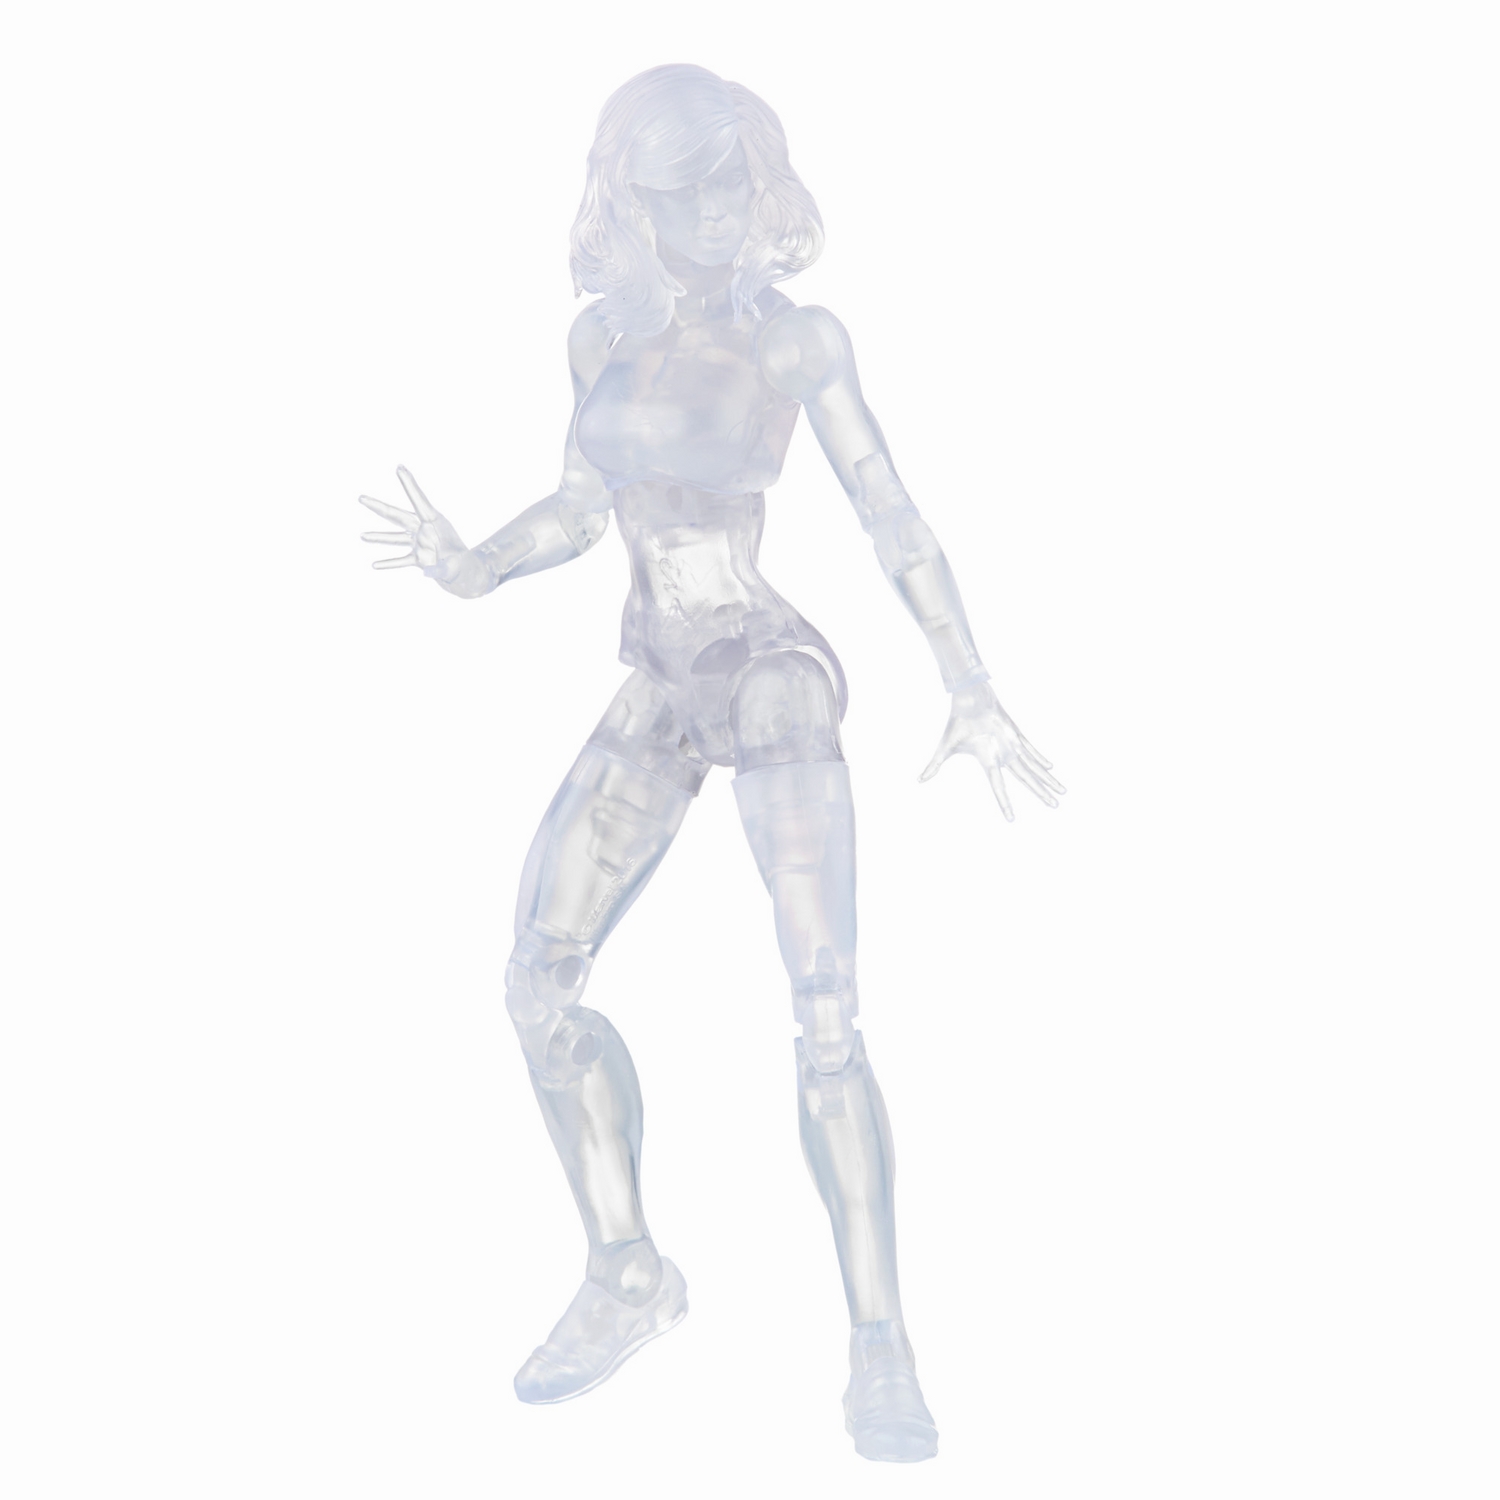 MARVEL LEGENDS SERIES 6-INCH RETRO FANTASTIC FOUR MARVEL’S INVISIBLE WOMAN Figure (Clear)_oop 5.jpg